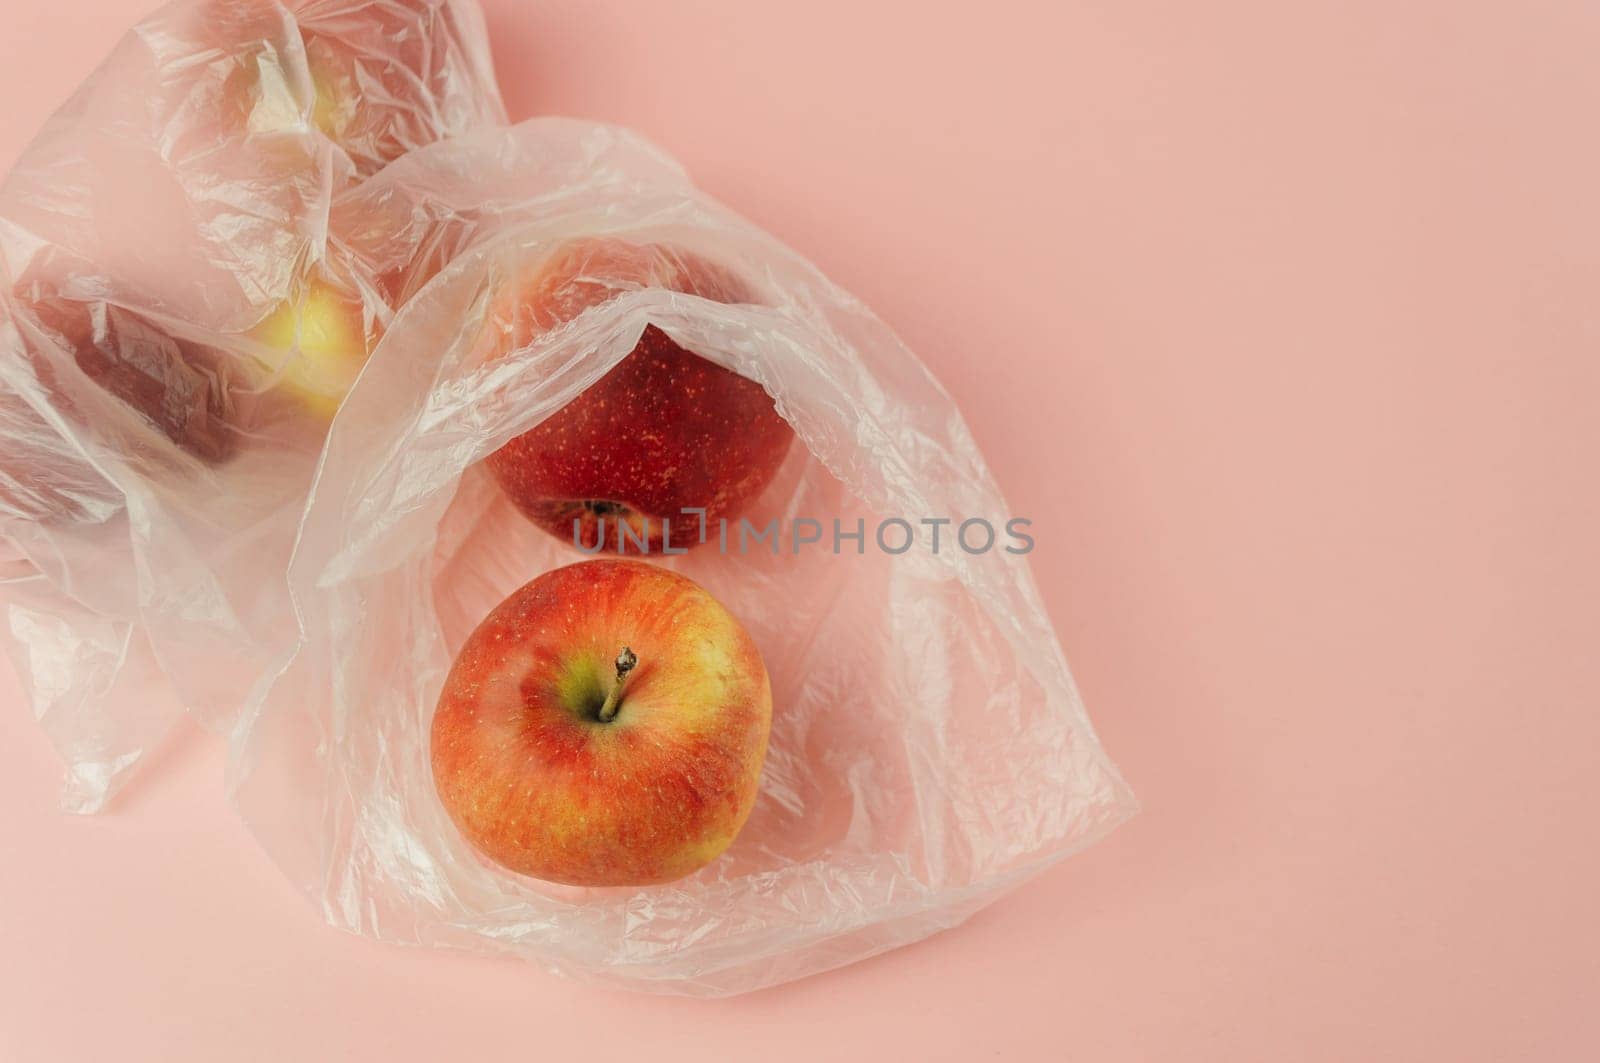 A plastic bag with a red apple inside by Alla_Morozova93